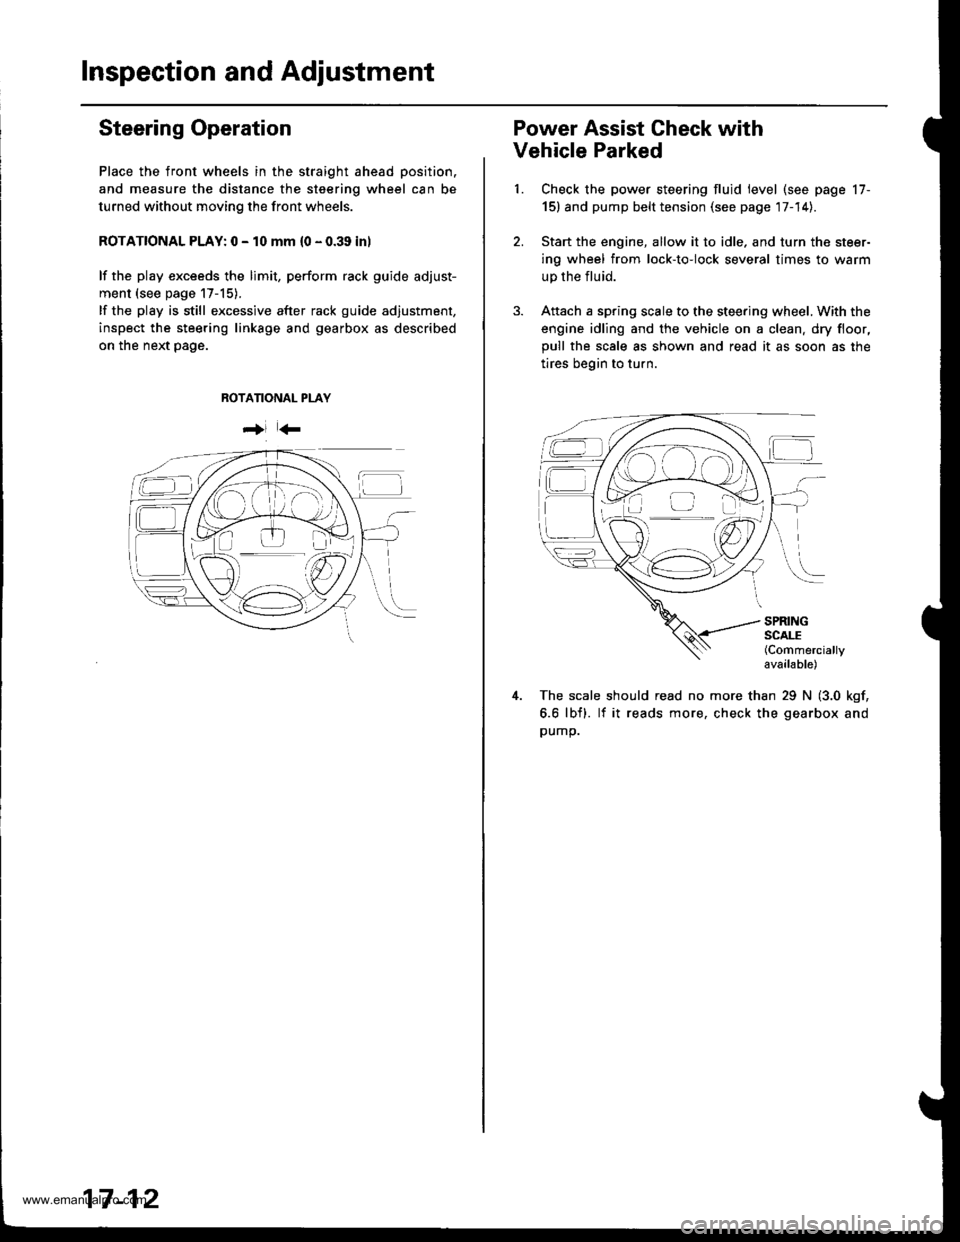 HONDA CR-V 1998 RD1-RD3 / 1.G Workshop Manual 
Inspection and Adjustment
Steering Operation
Place the front wheels in the straight ahead position.
and measure the distance the steering wheel can be
turned without moving the front wheels.
ROTATION